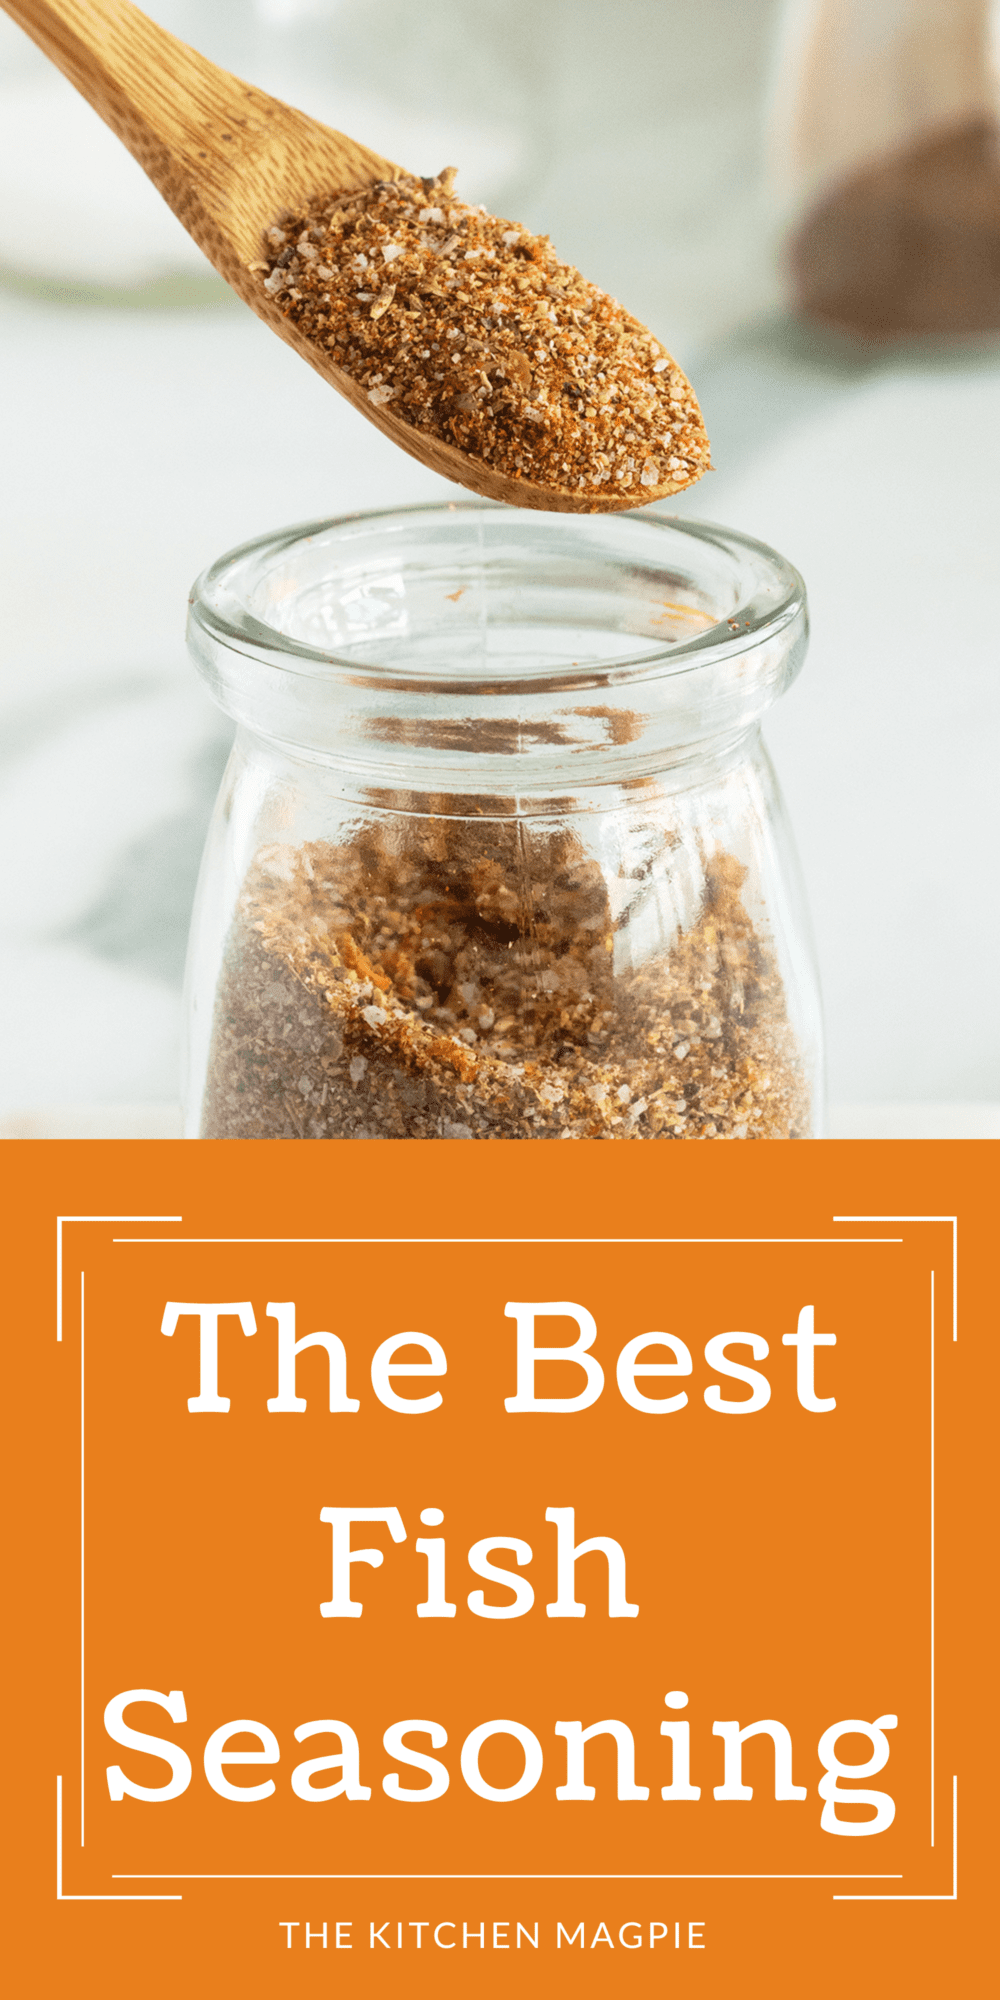 This homemade fish seasoning works perfectly on pretty much all types of white fish. Make it ahead of time in a triple batch and store in your cupboard so it's ready when you need it!